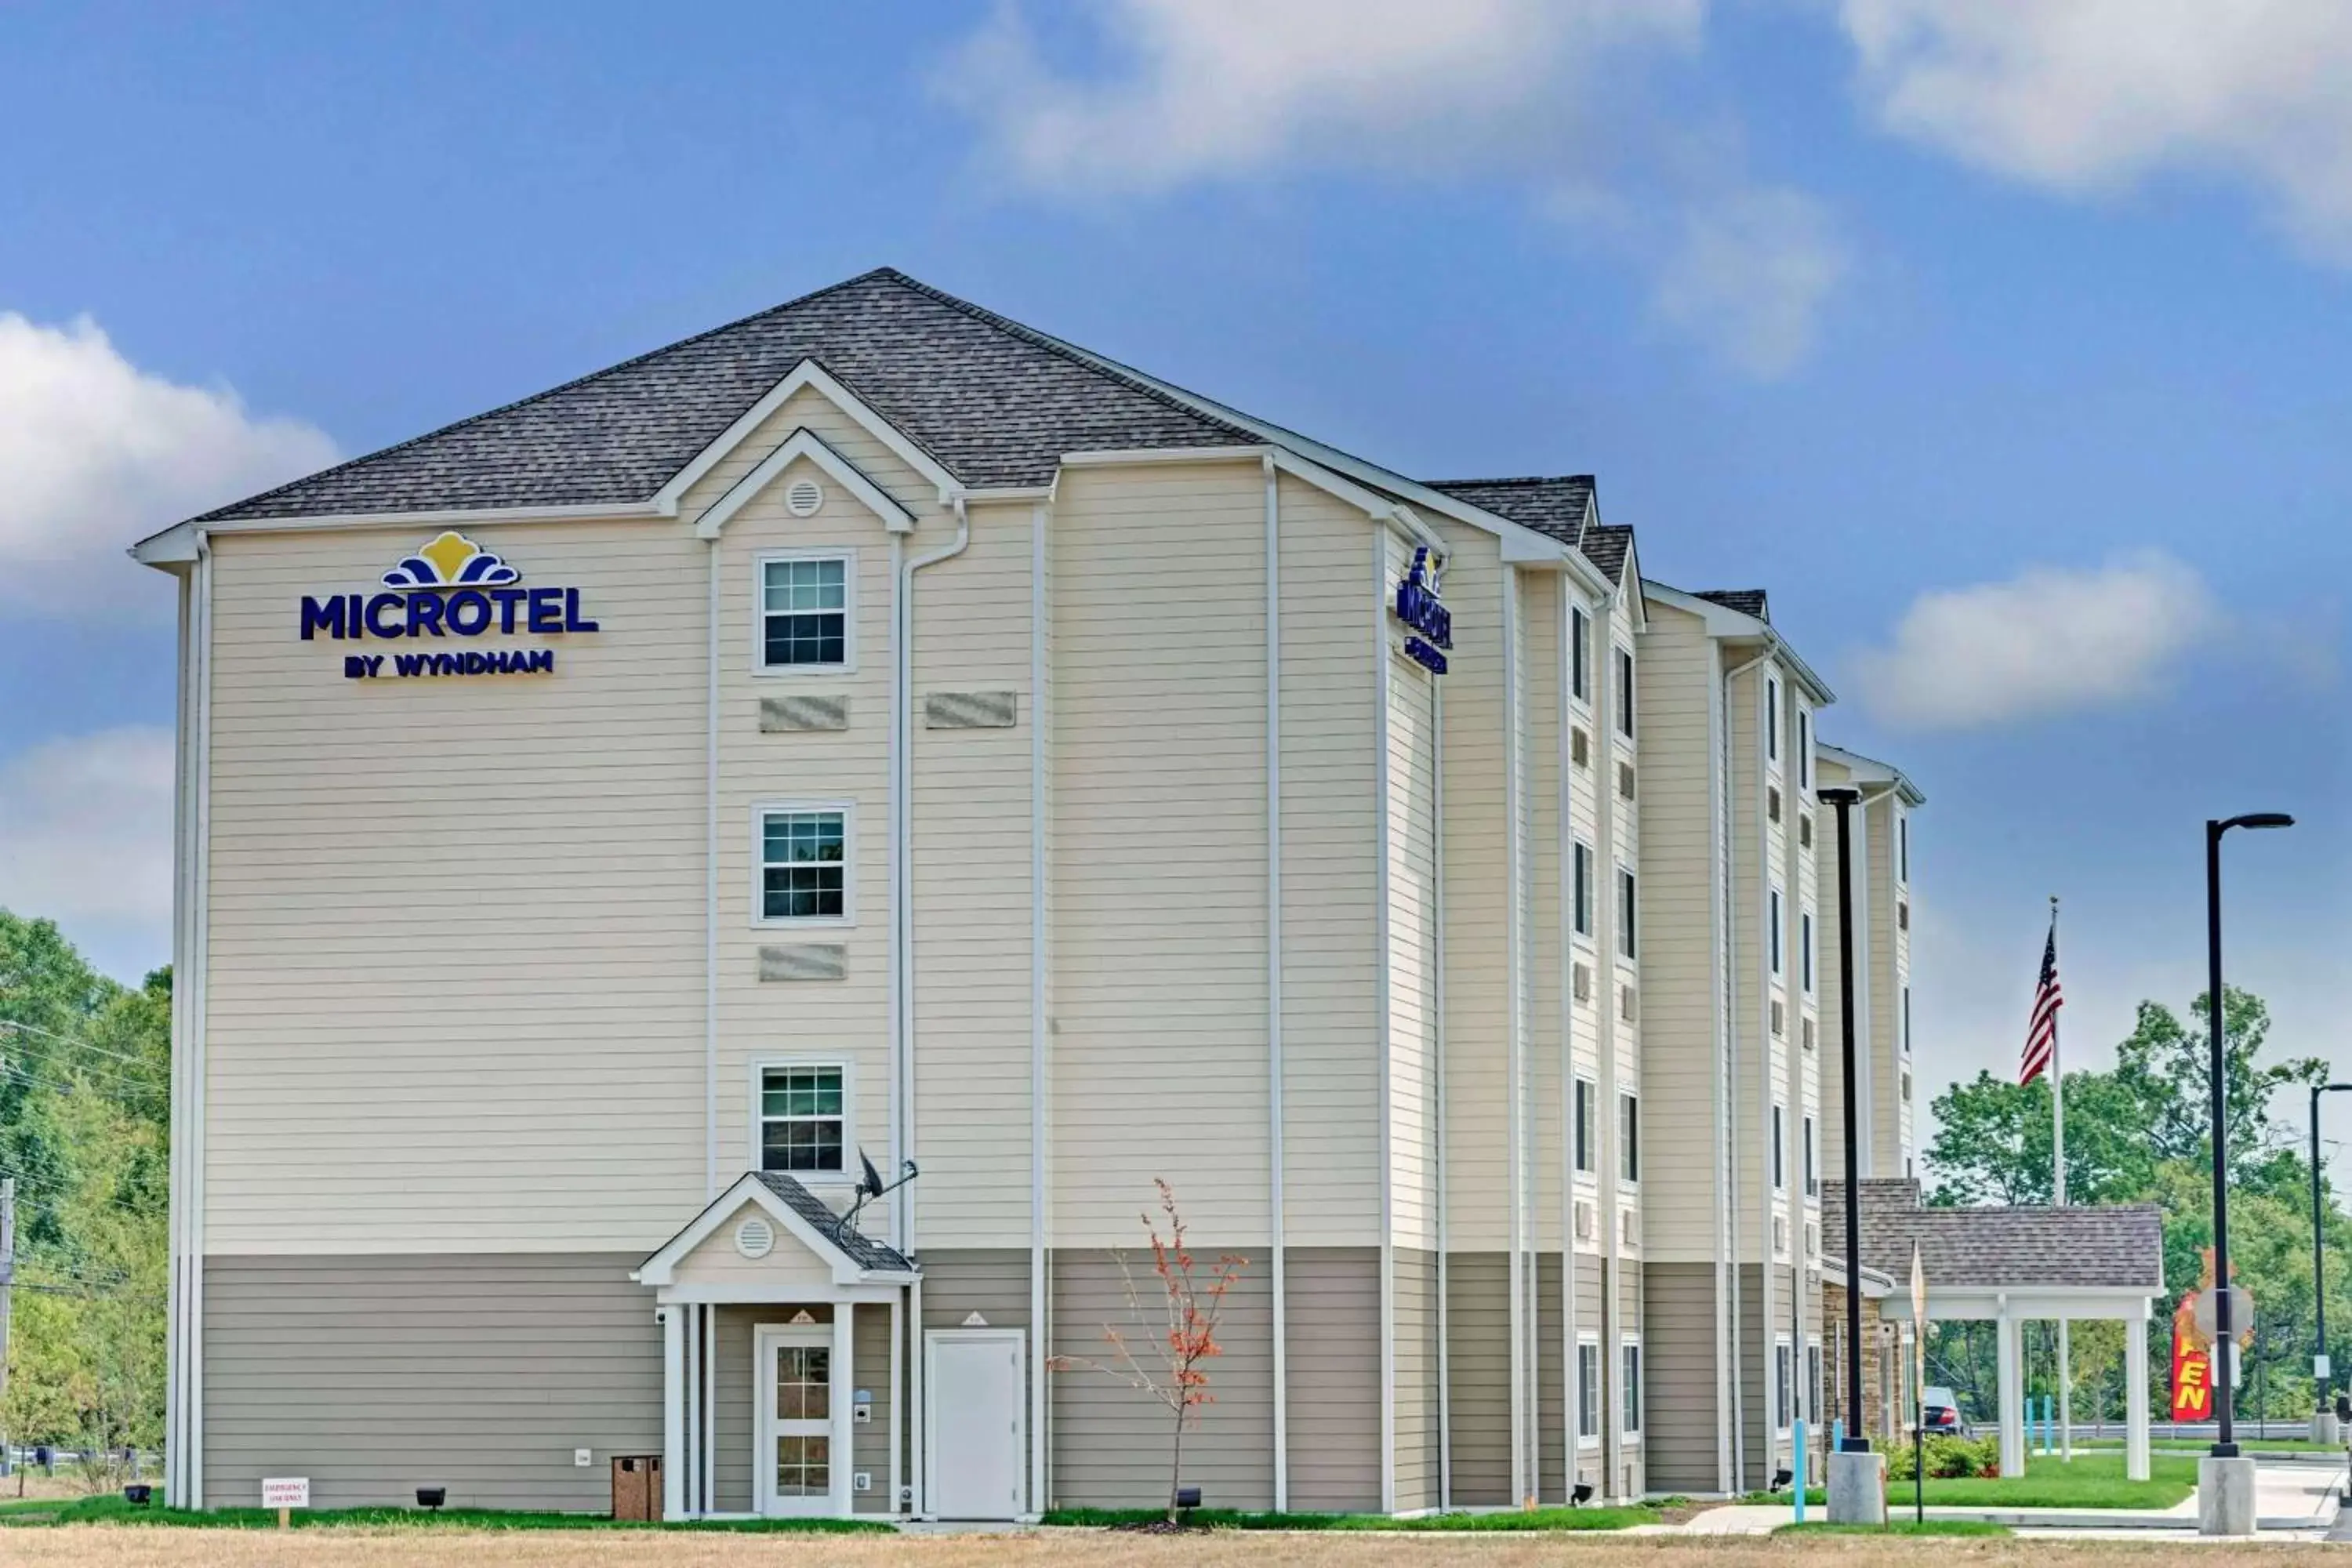 Property building in Microtel Inn & Suites by Wyndham Philadelphia Airport Ridley Park